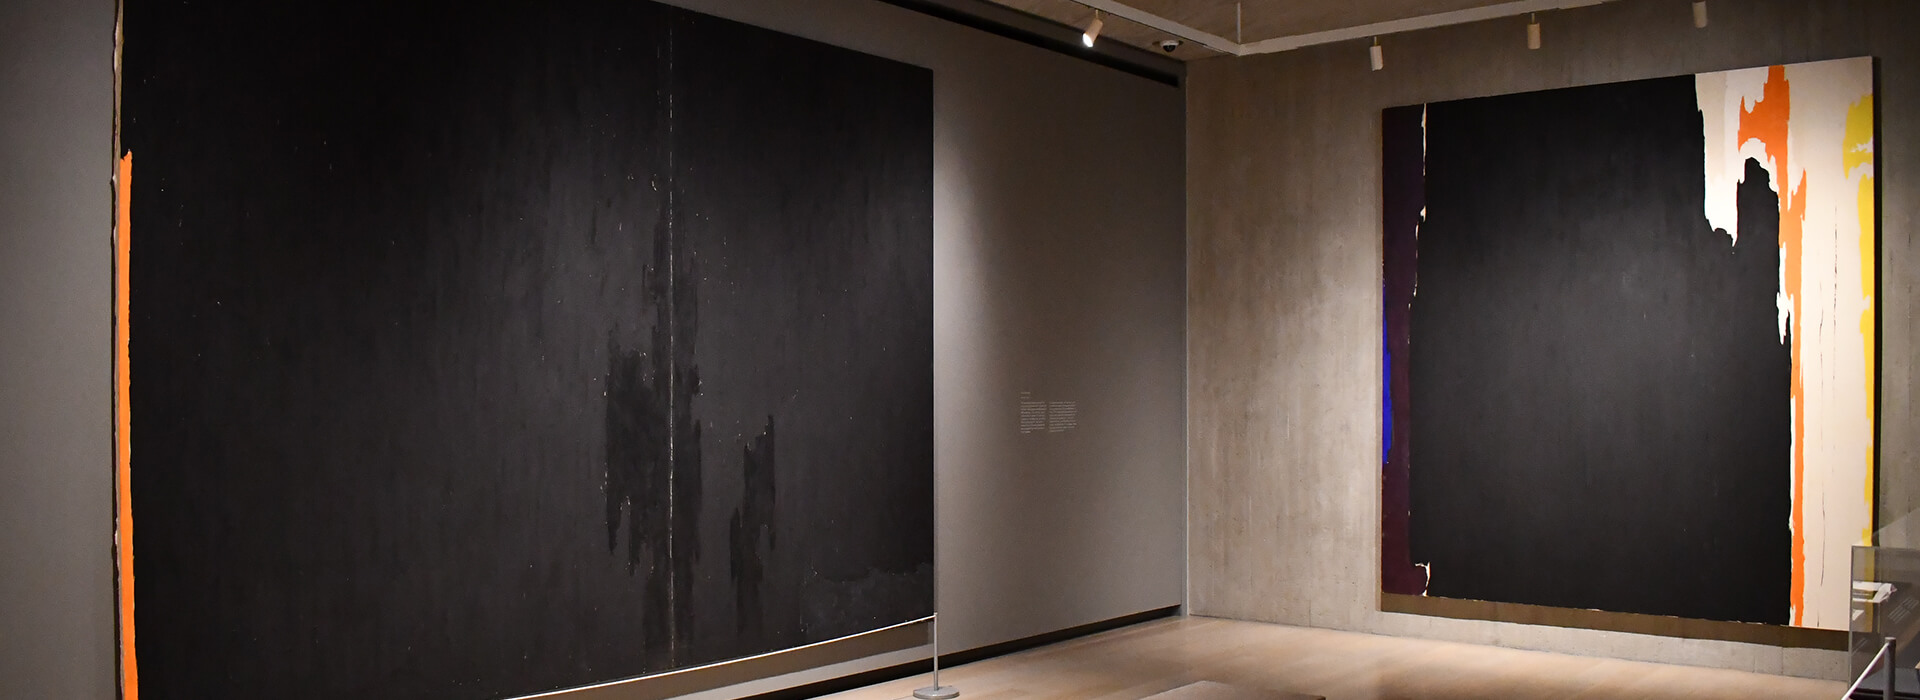 Installation image of a gallery with two abstract paintings with mostly black paint and hints of color